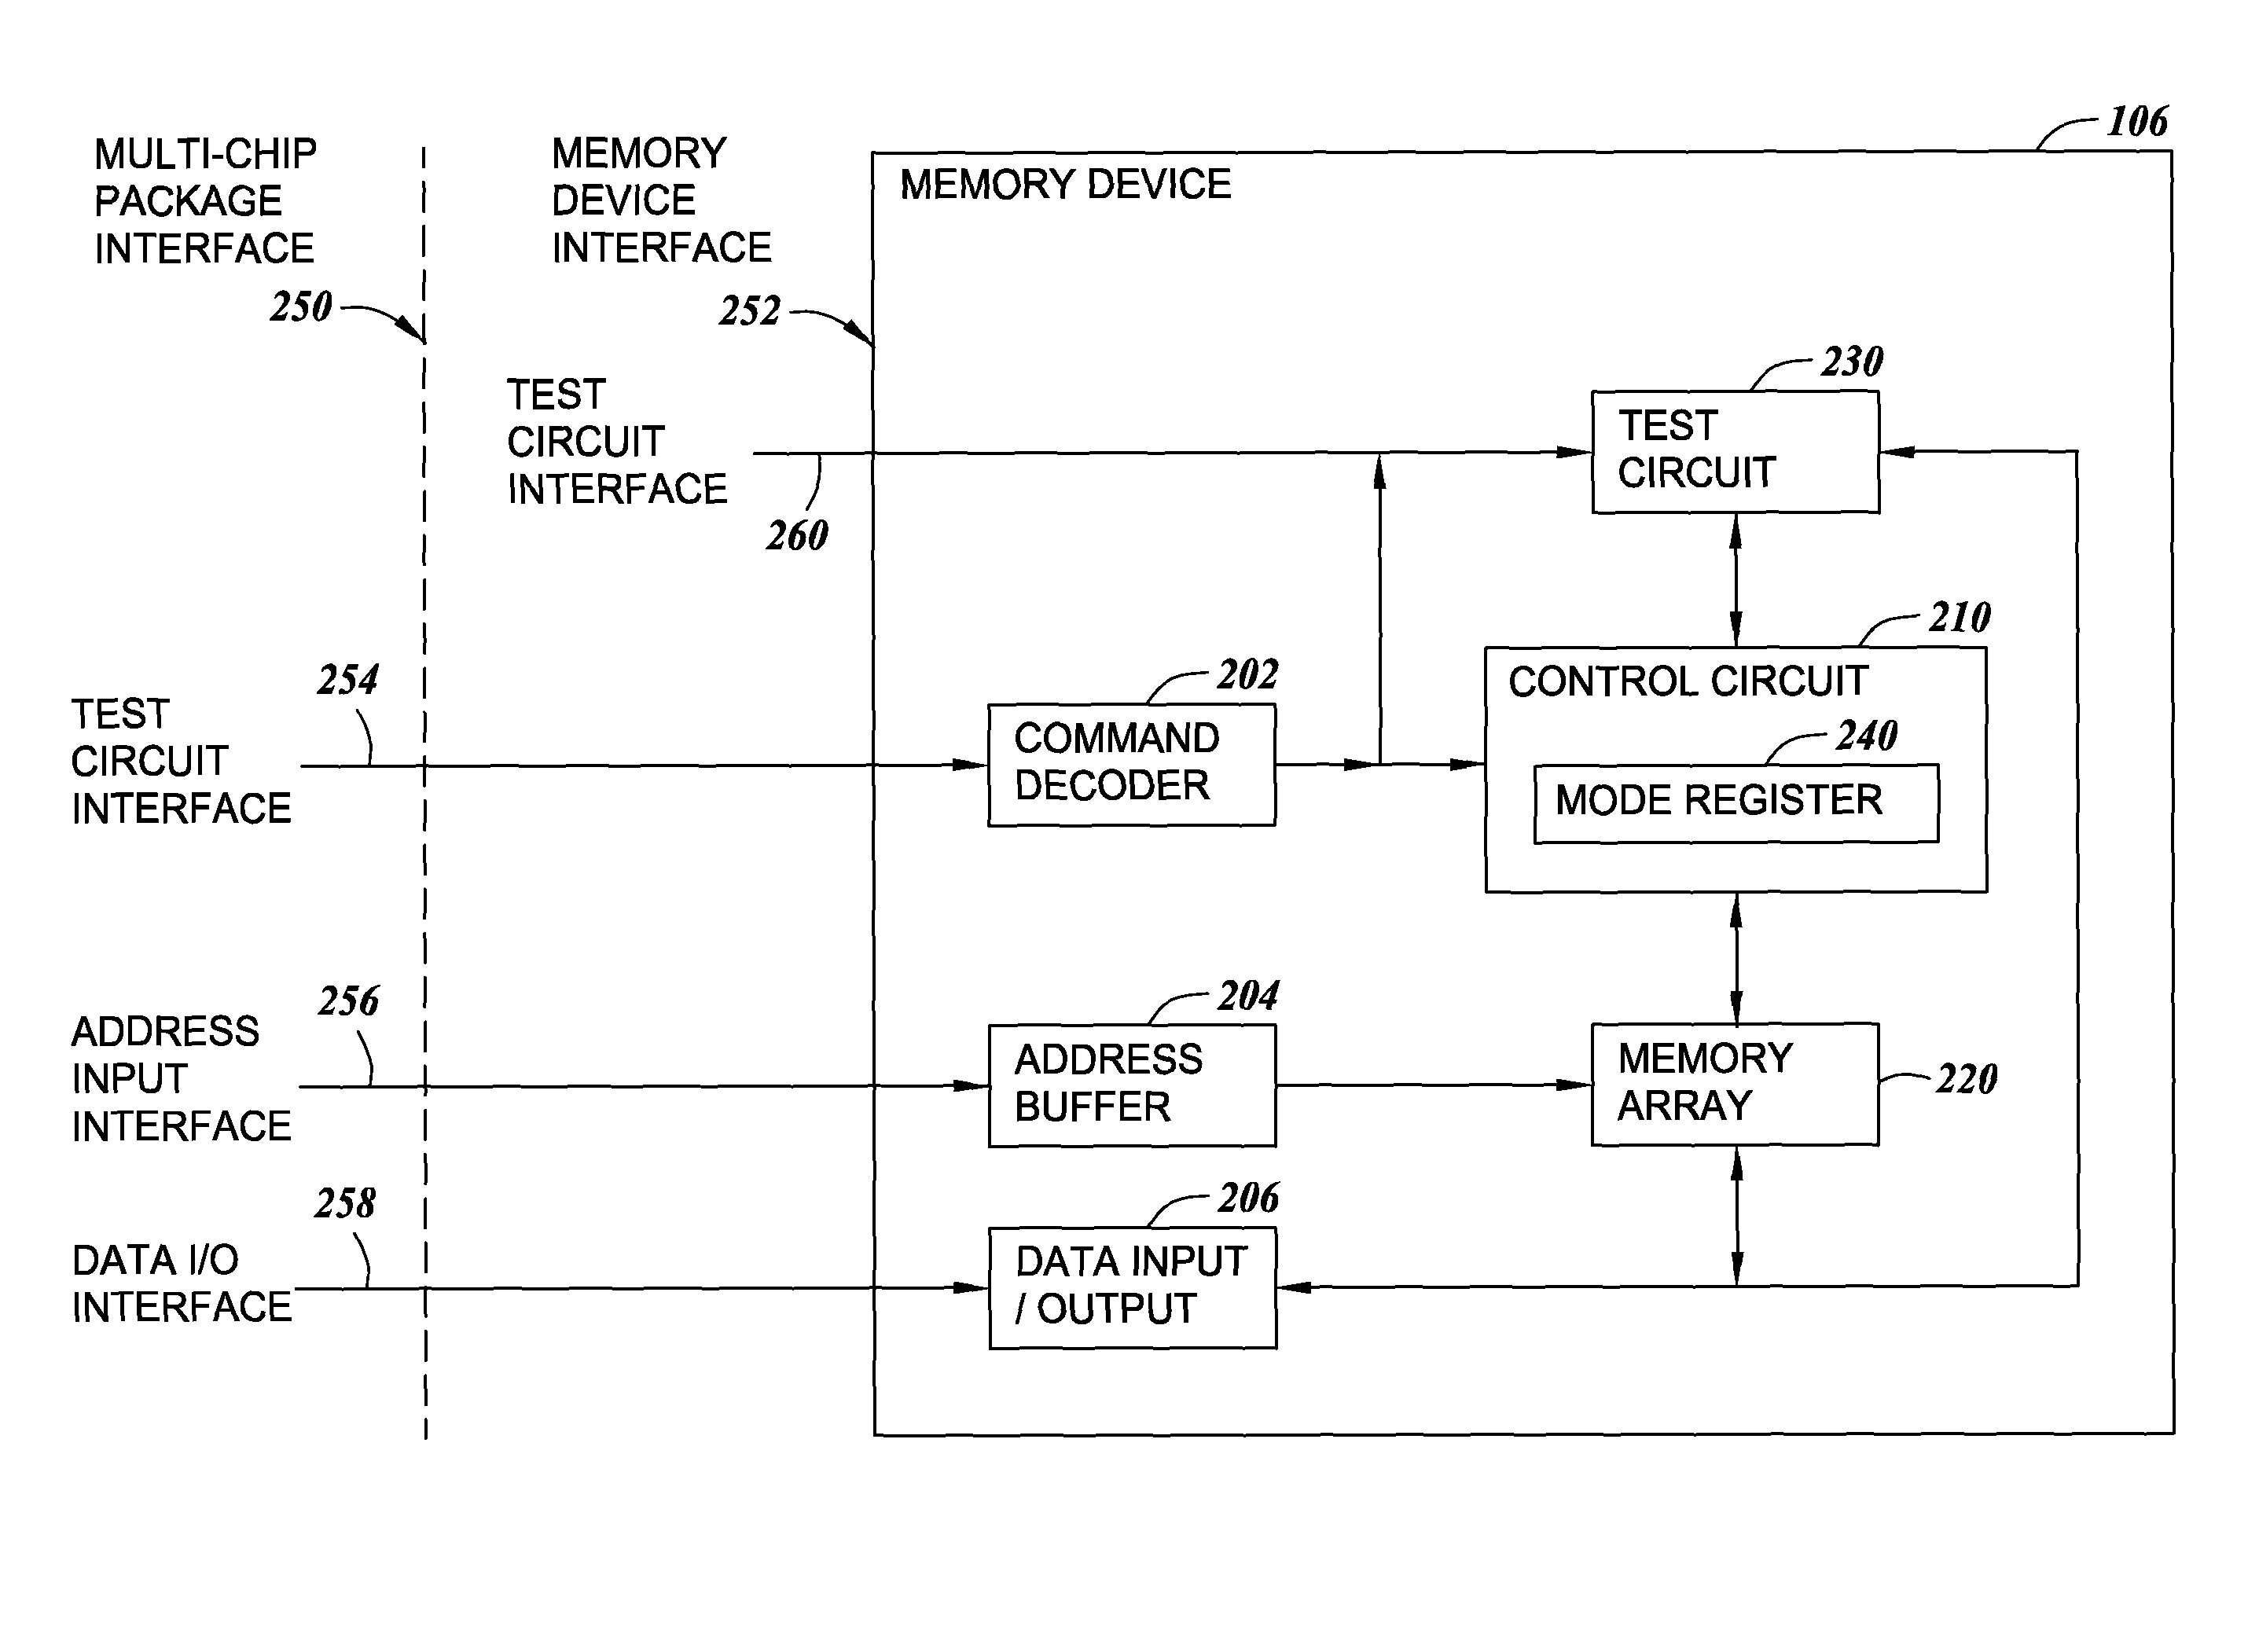 Method for self-test and self-repair in a multi-chip package environment